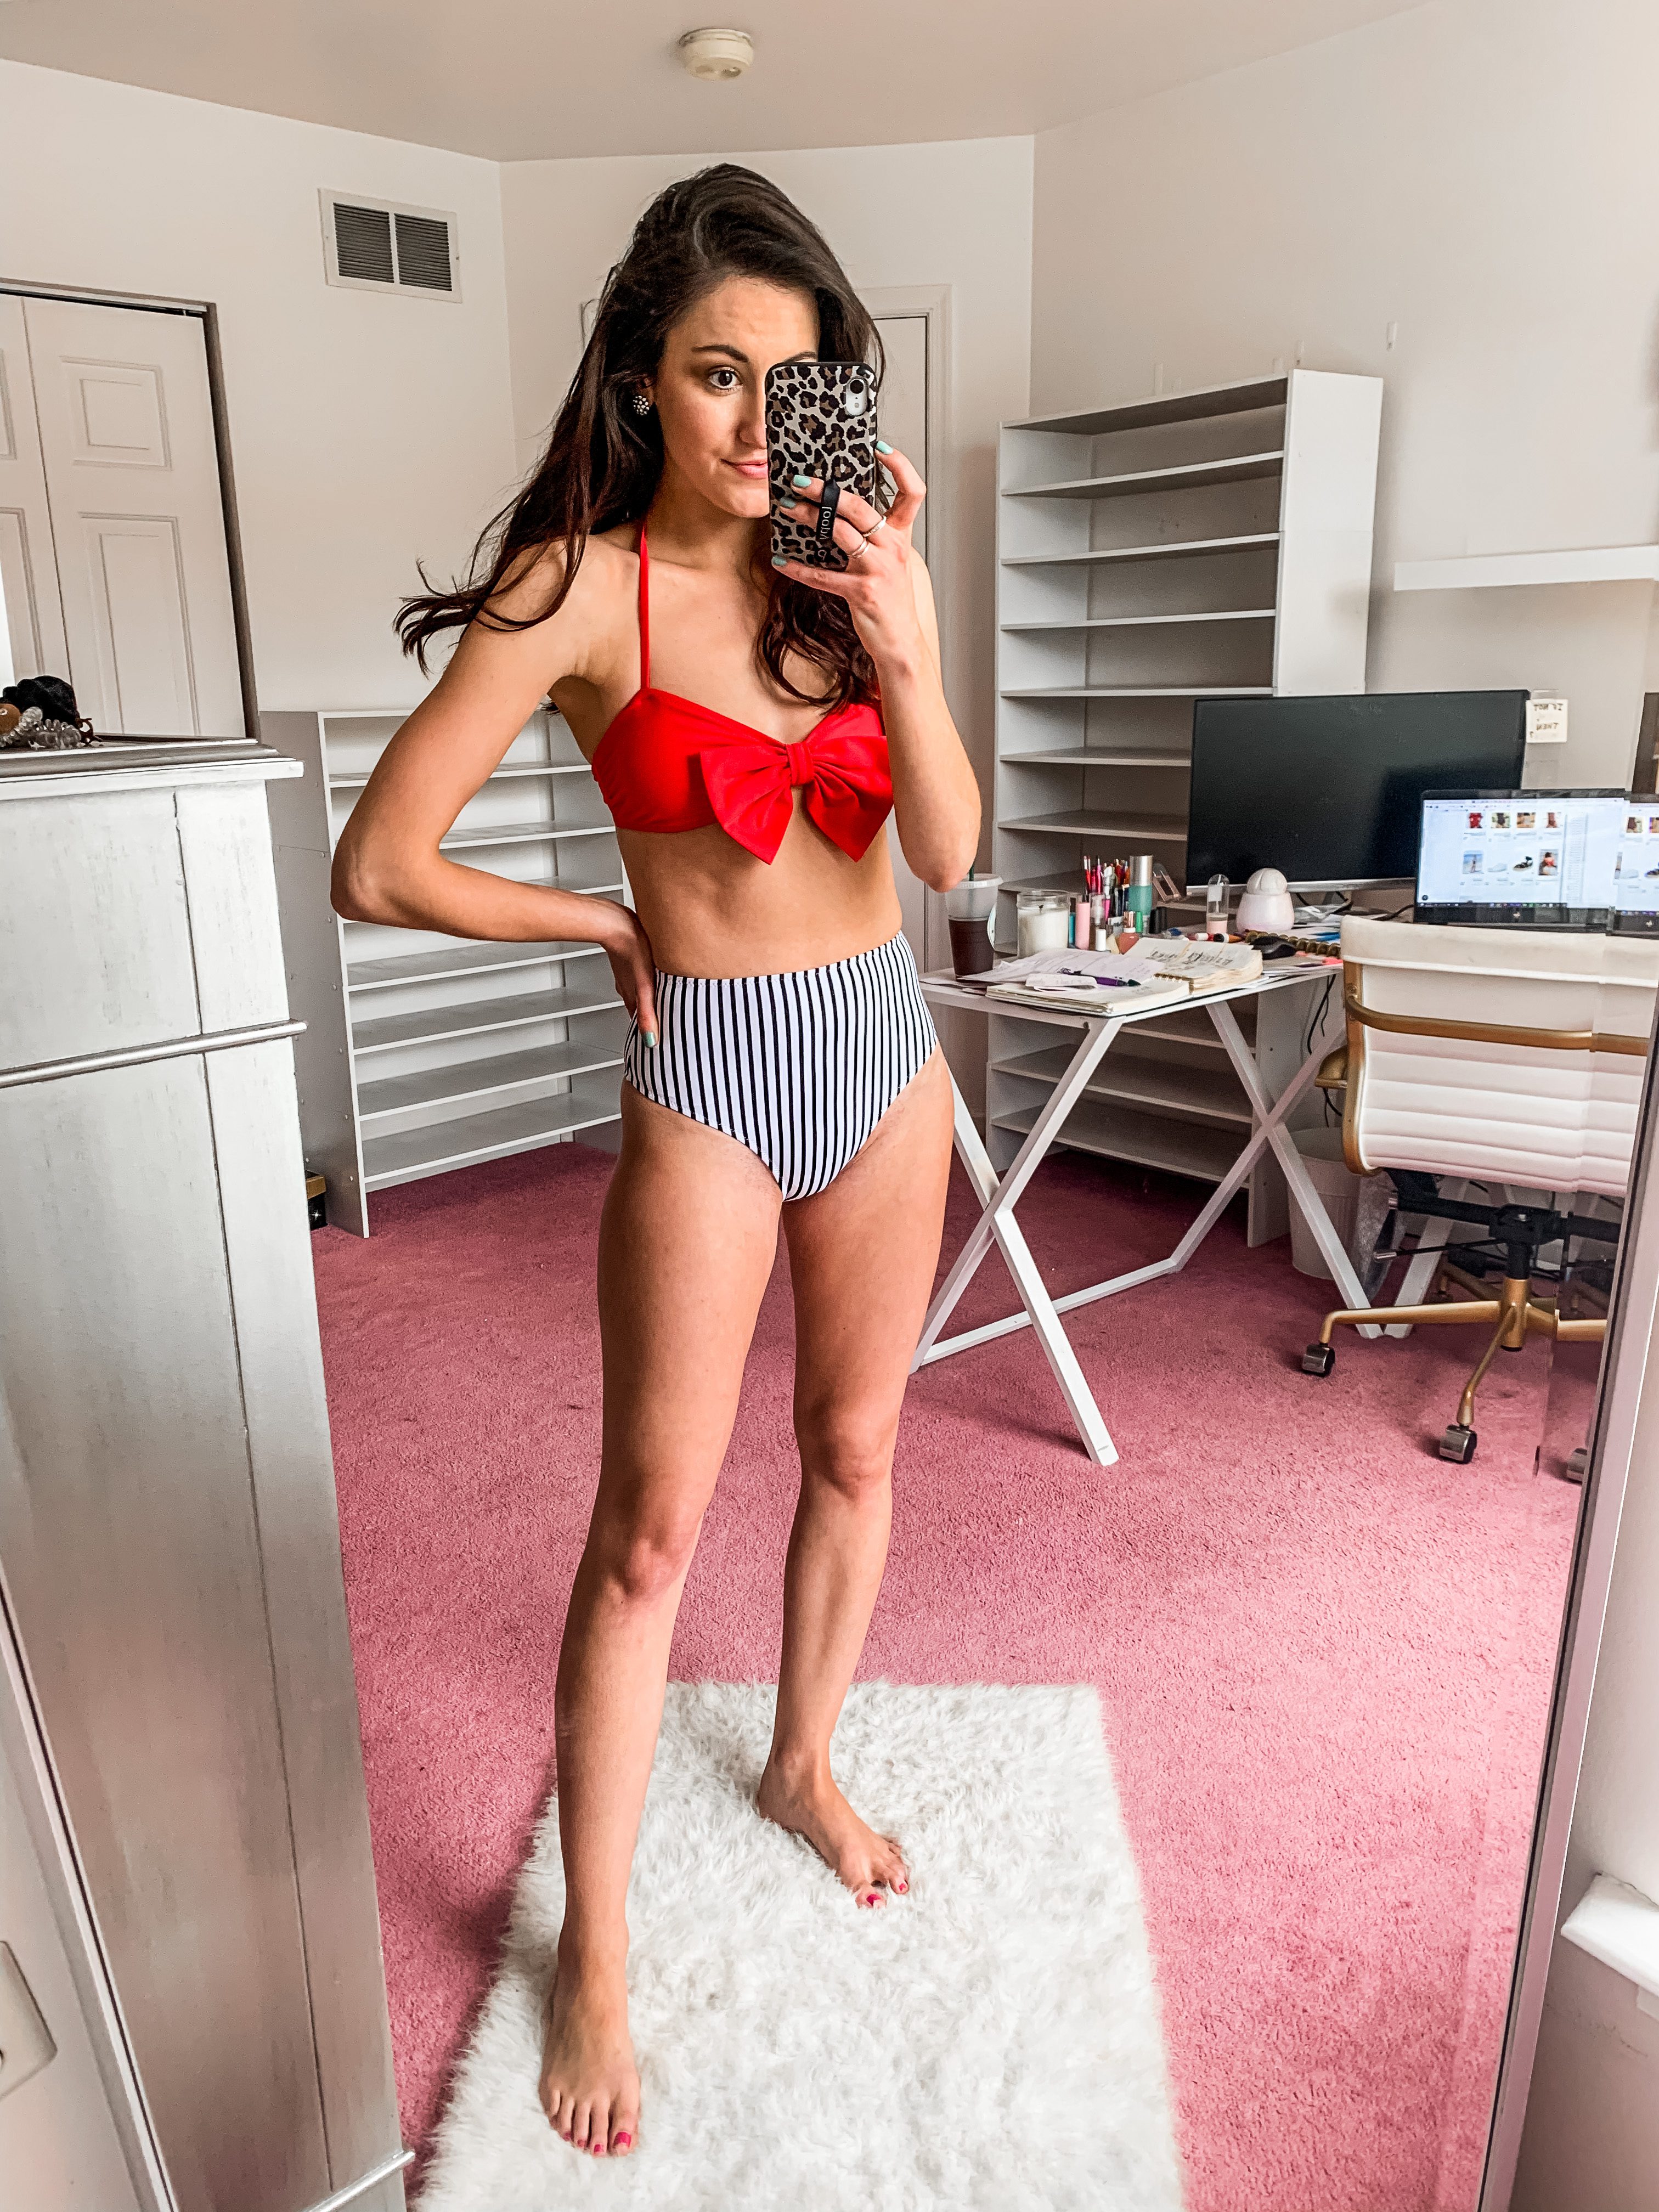 2020 SWIMSUIT HAUL: 11 Affordable, Comfortable, More Modest Swimsuits - on Coming Up Roses